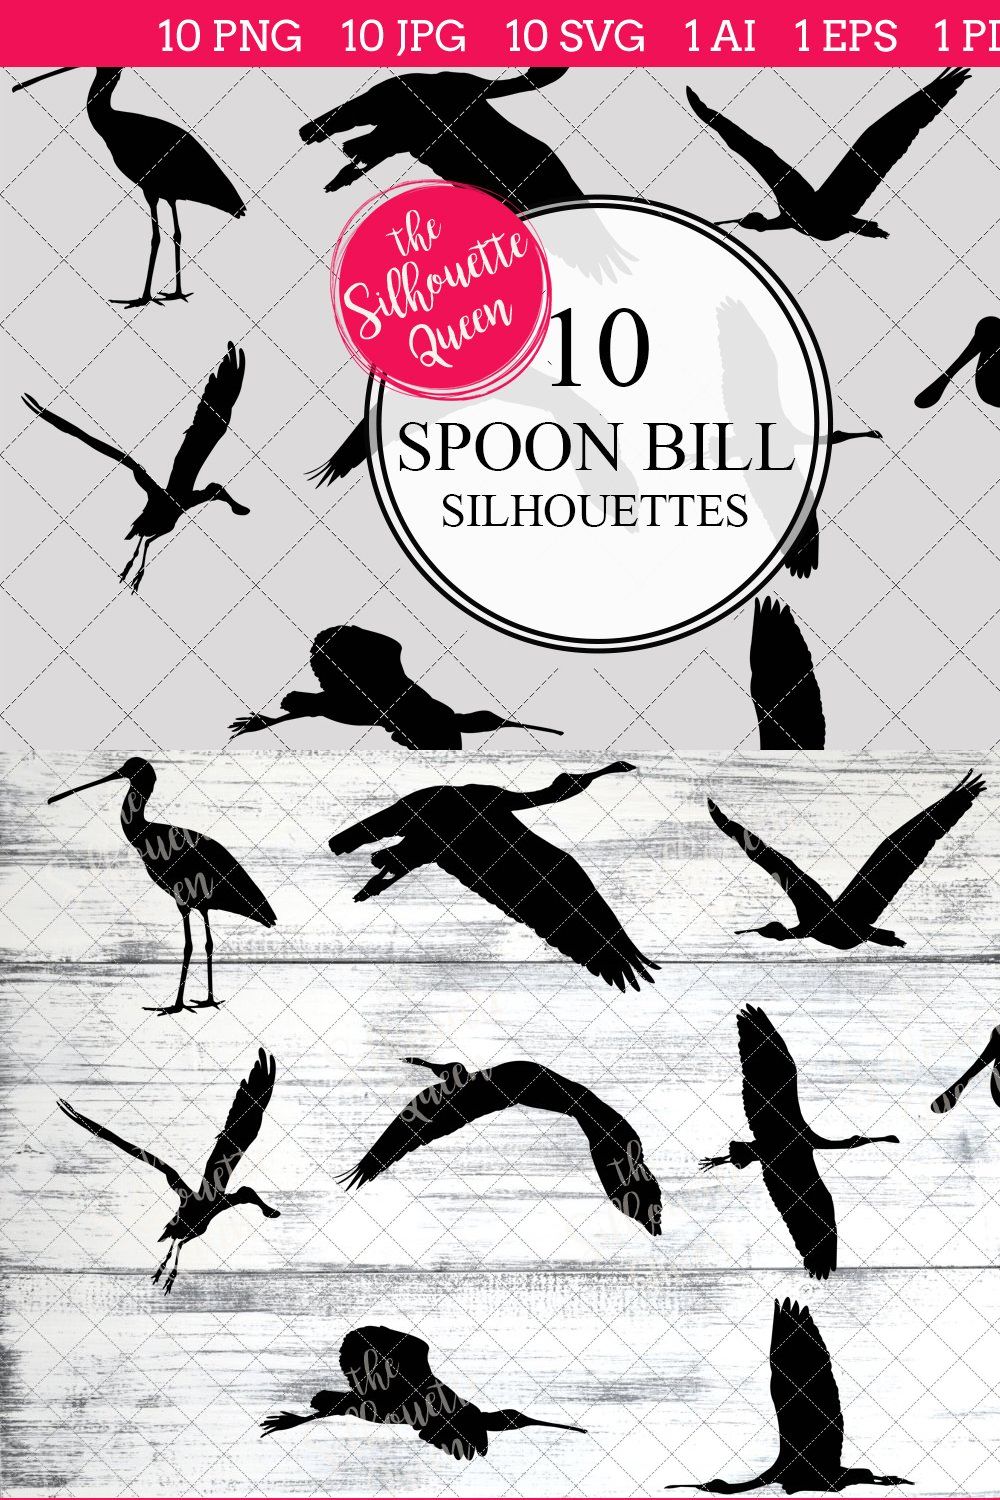 Spoon bill silhouette vector graphic pinterest preview image.